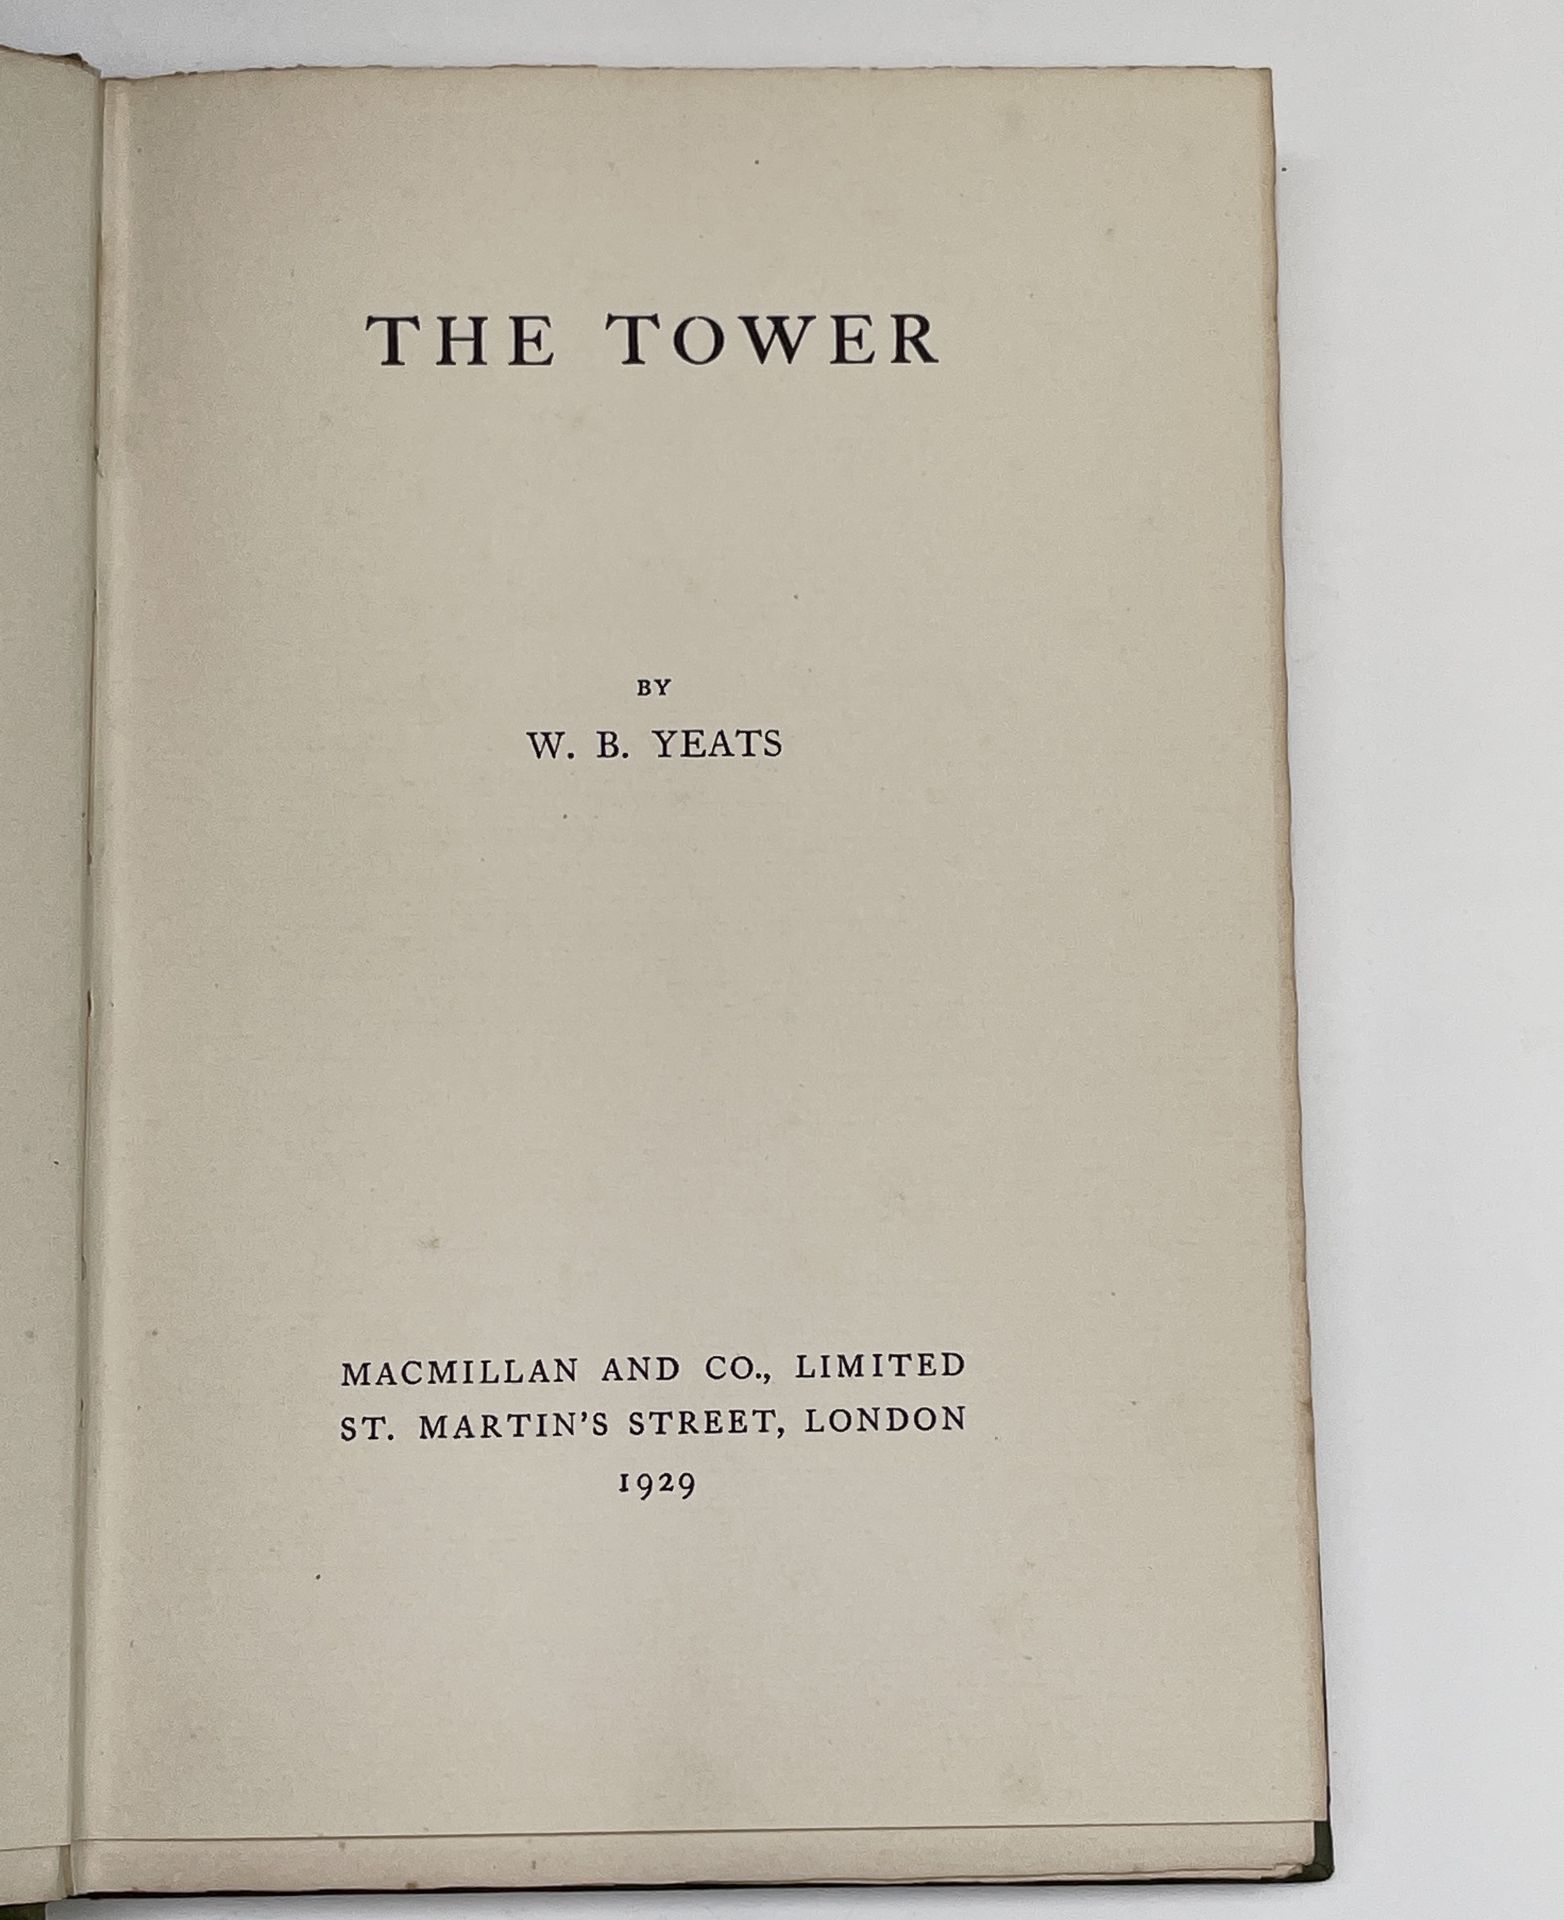 WILLIAM BUTLER YEATS. 'The Tower.' Original cloth gilt, designed by Thomas Sturge Moore, vg - Image 7 of 8